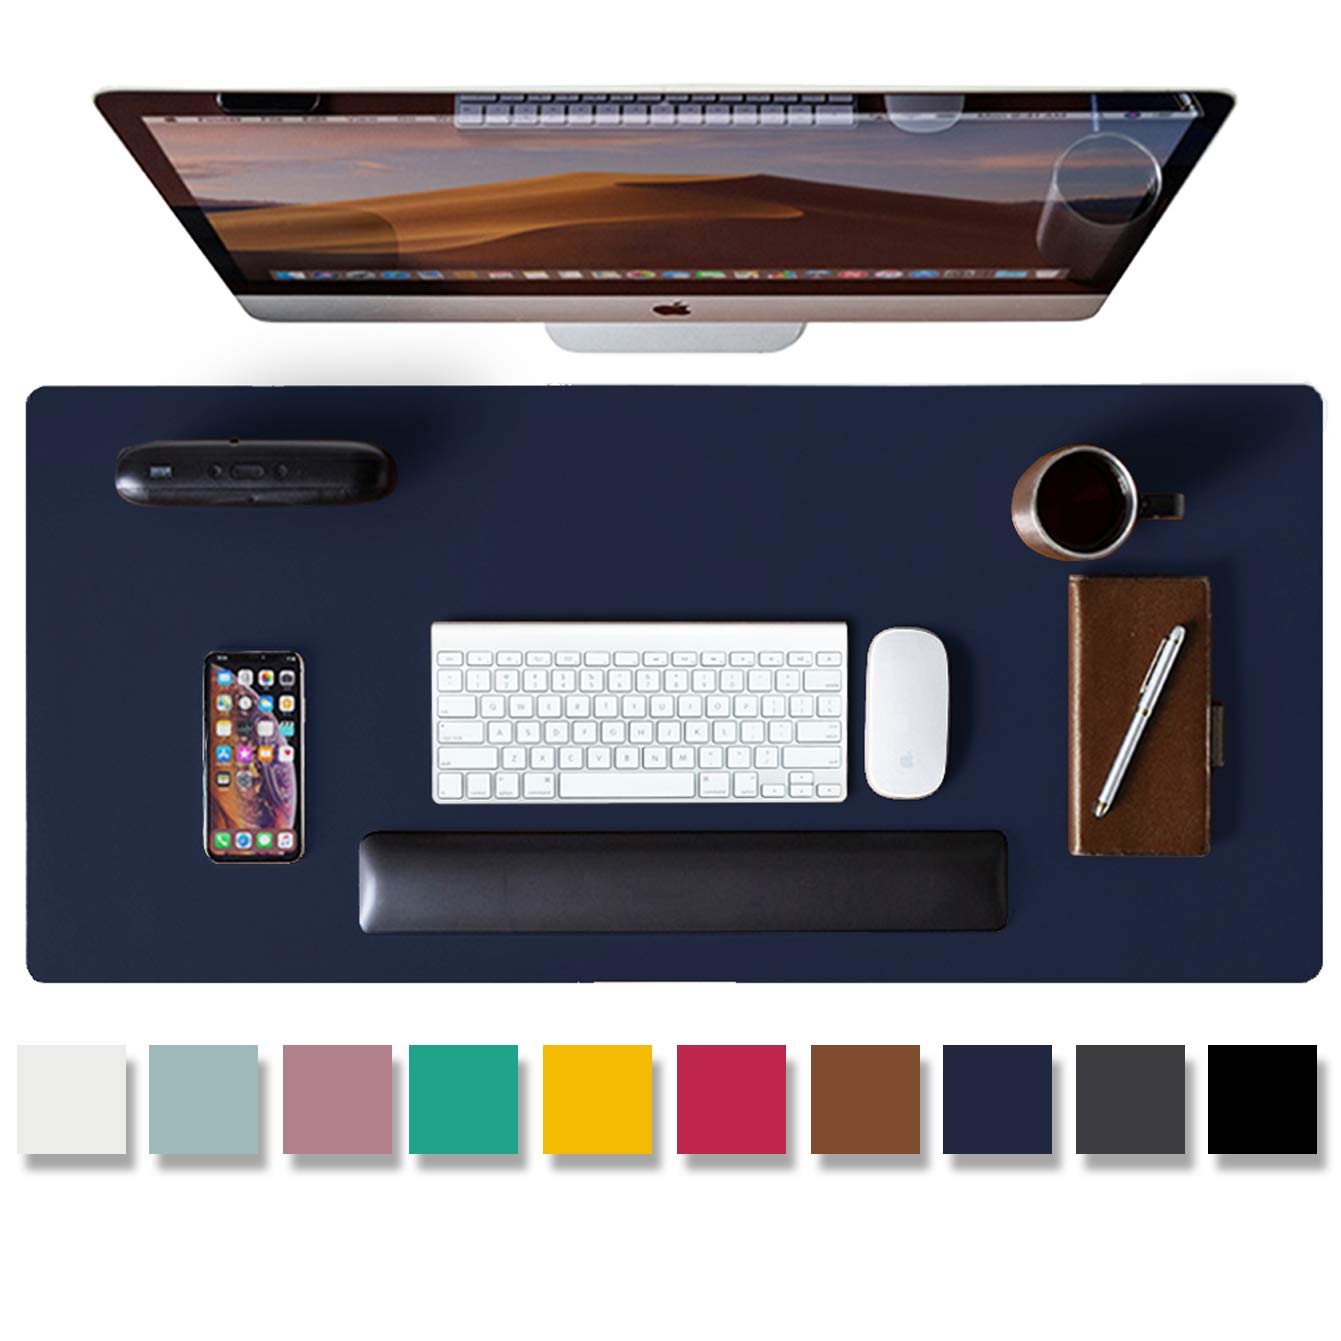 Leather Desk Pad Protector,Mouse Pad,Office Desk Mat